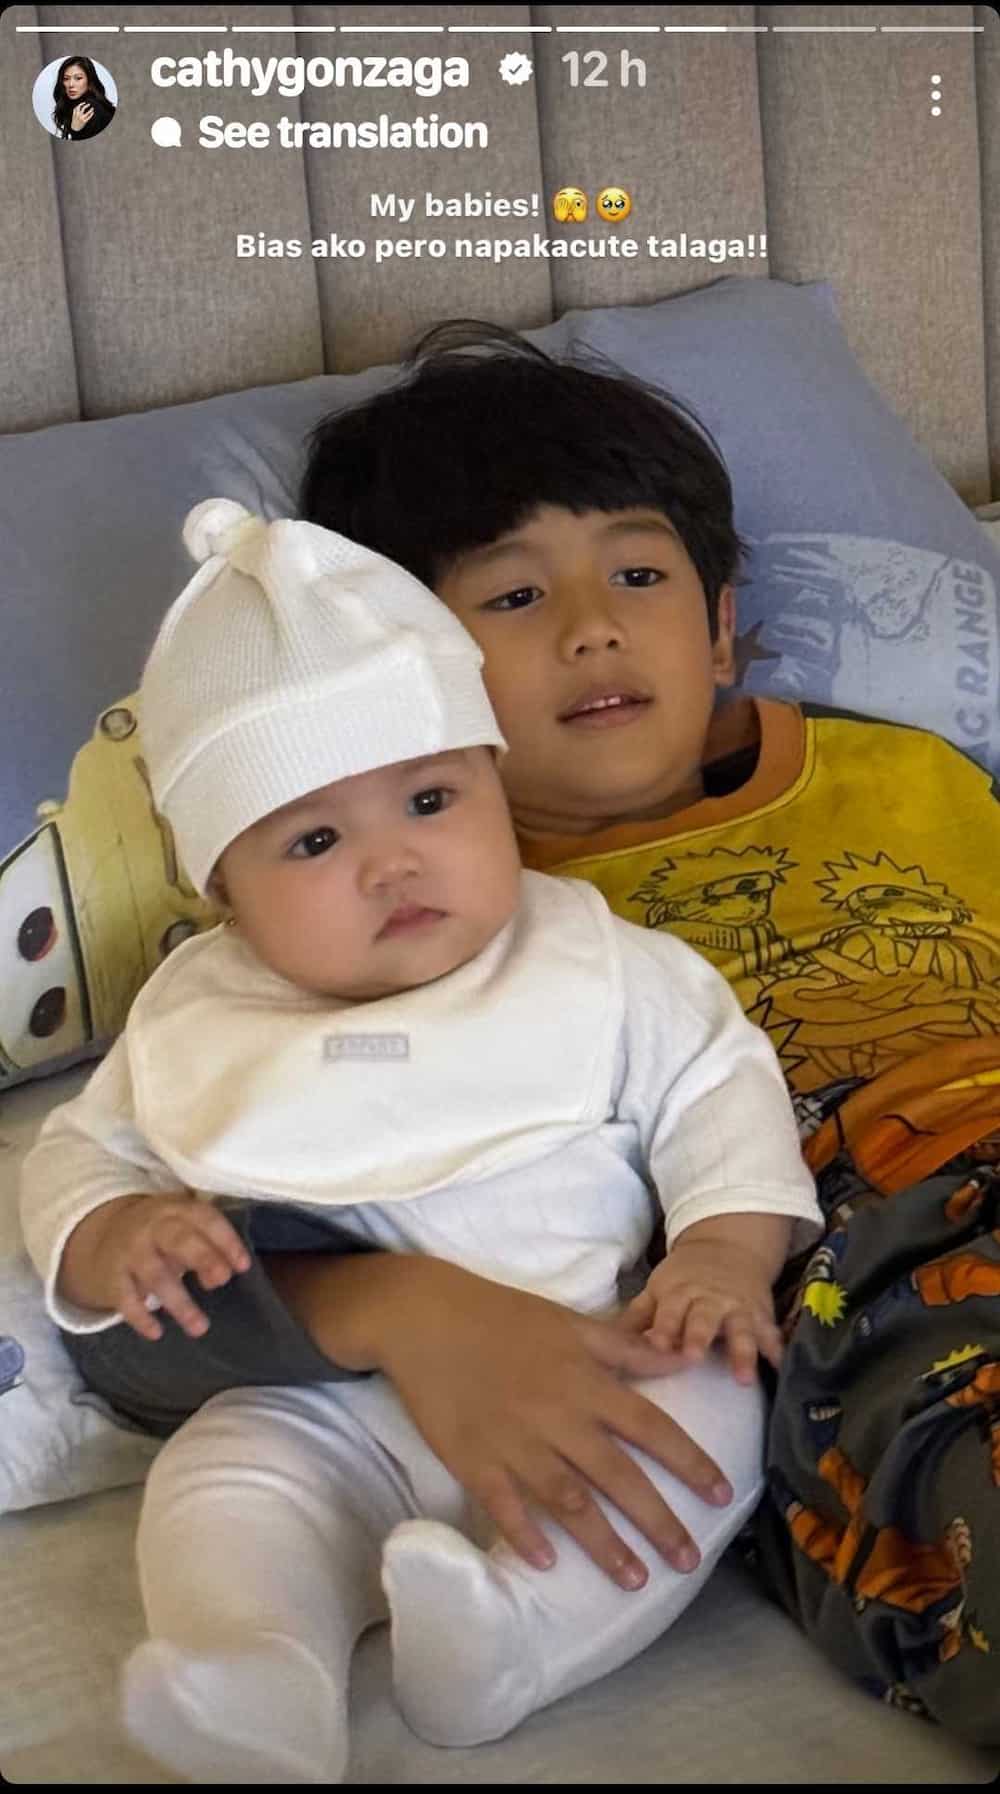 Alex Gonzaga gushes over Toni Gonzaga’s kids Polly and Seve: “My babies!”